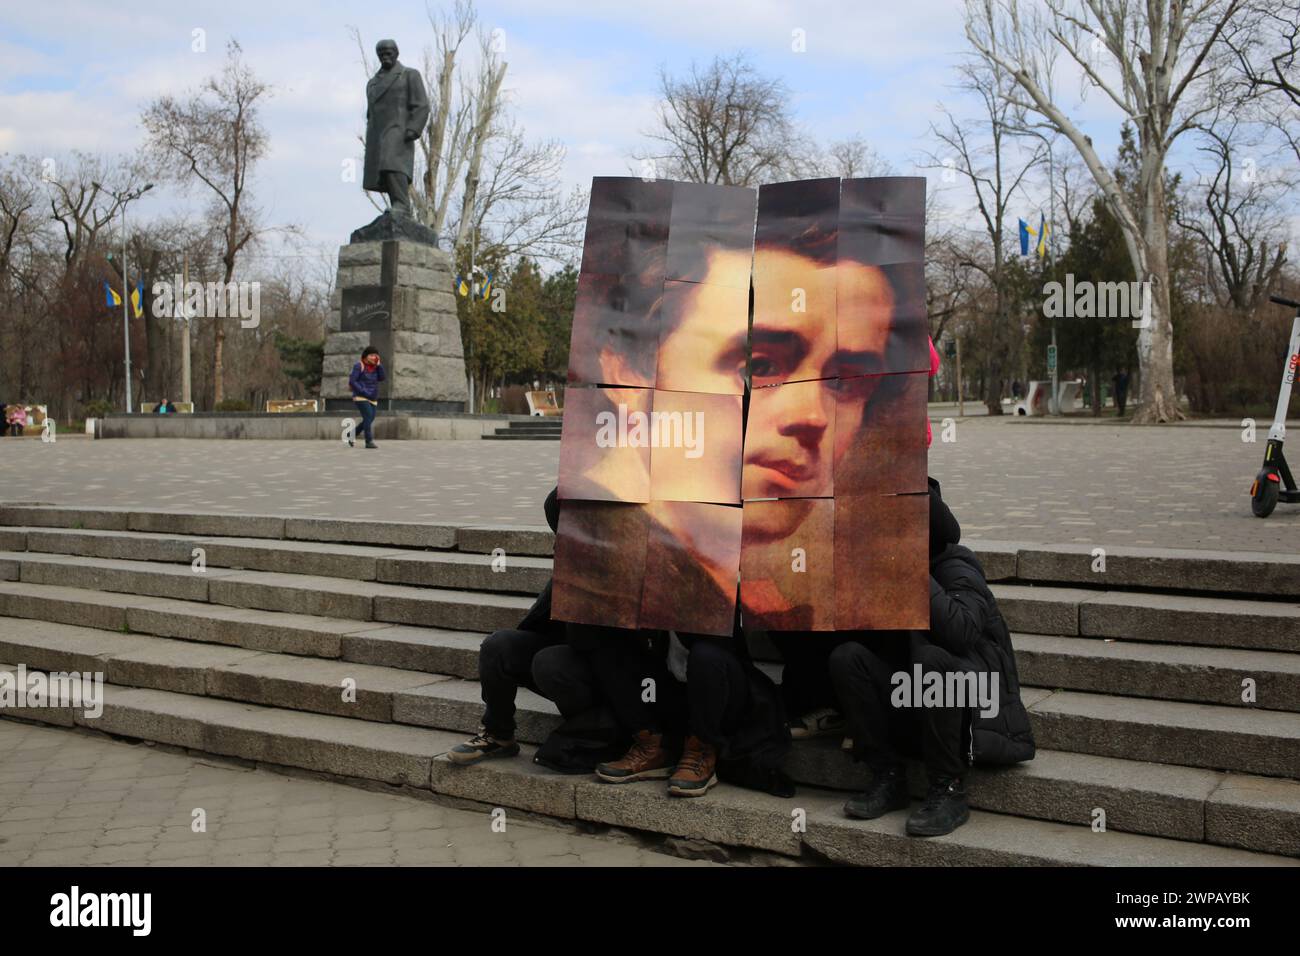 Students of the Odessa Higher Professional School of Trade and Food Technology put together a puzzle with the face of Taras Shevchenko against the background of the monument of the same name in the Central Park of Culture and Leisure named after Taras Grigorievich Shevchenko. Young patriots hold an event dedicated to the birthday of the famous Ukrainian poet. Taras Hryhorovych Shevchenko (9 March 1814 - 10 March 1861) was a Ukrainian poet, writer, artist, public and political figure, folklorist and ethnographer. He was a fellow of the Imperial Academy of Arts and a member of the Brotherhood of Stock Photo